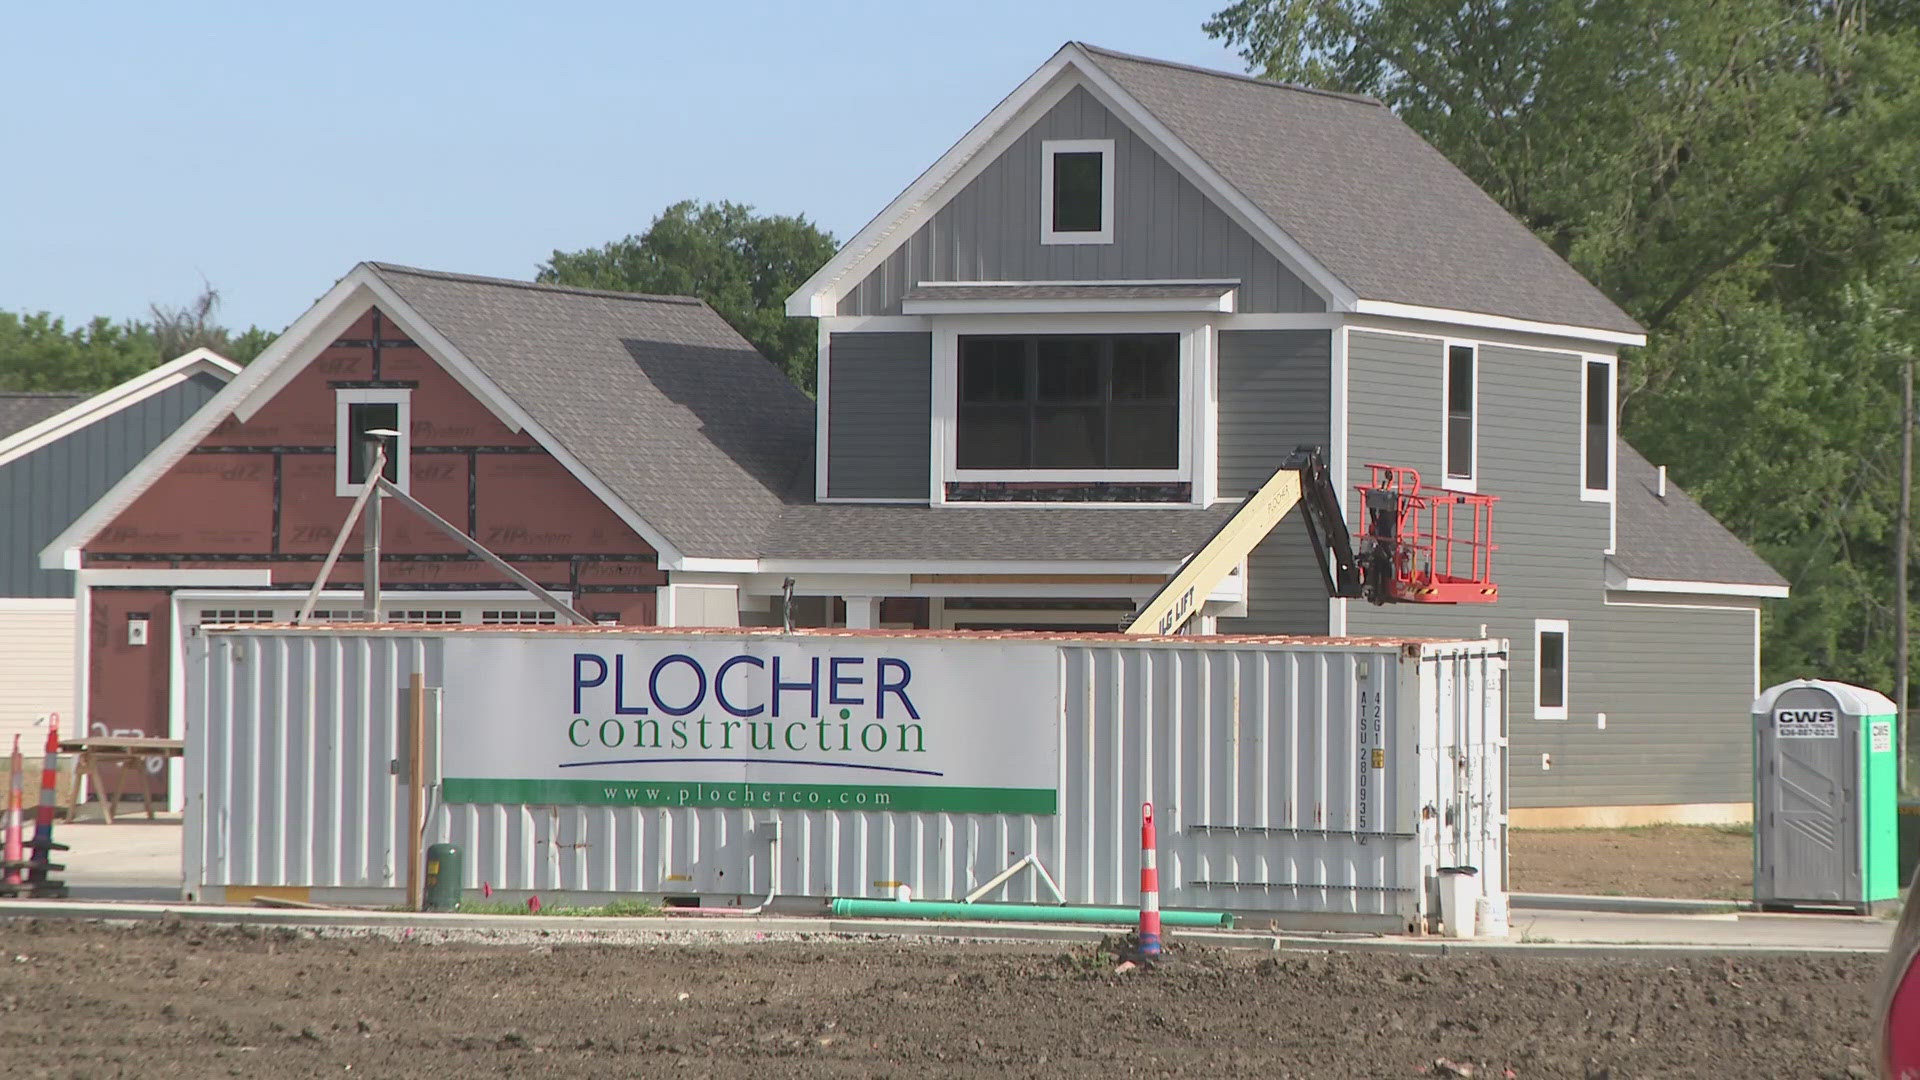 An East St. Louis nonprofit is nearly finished with the construction of 20 new homes near Jones Park.